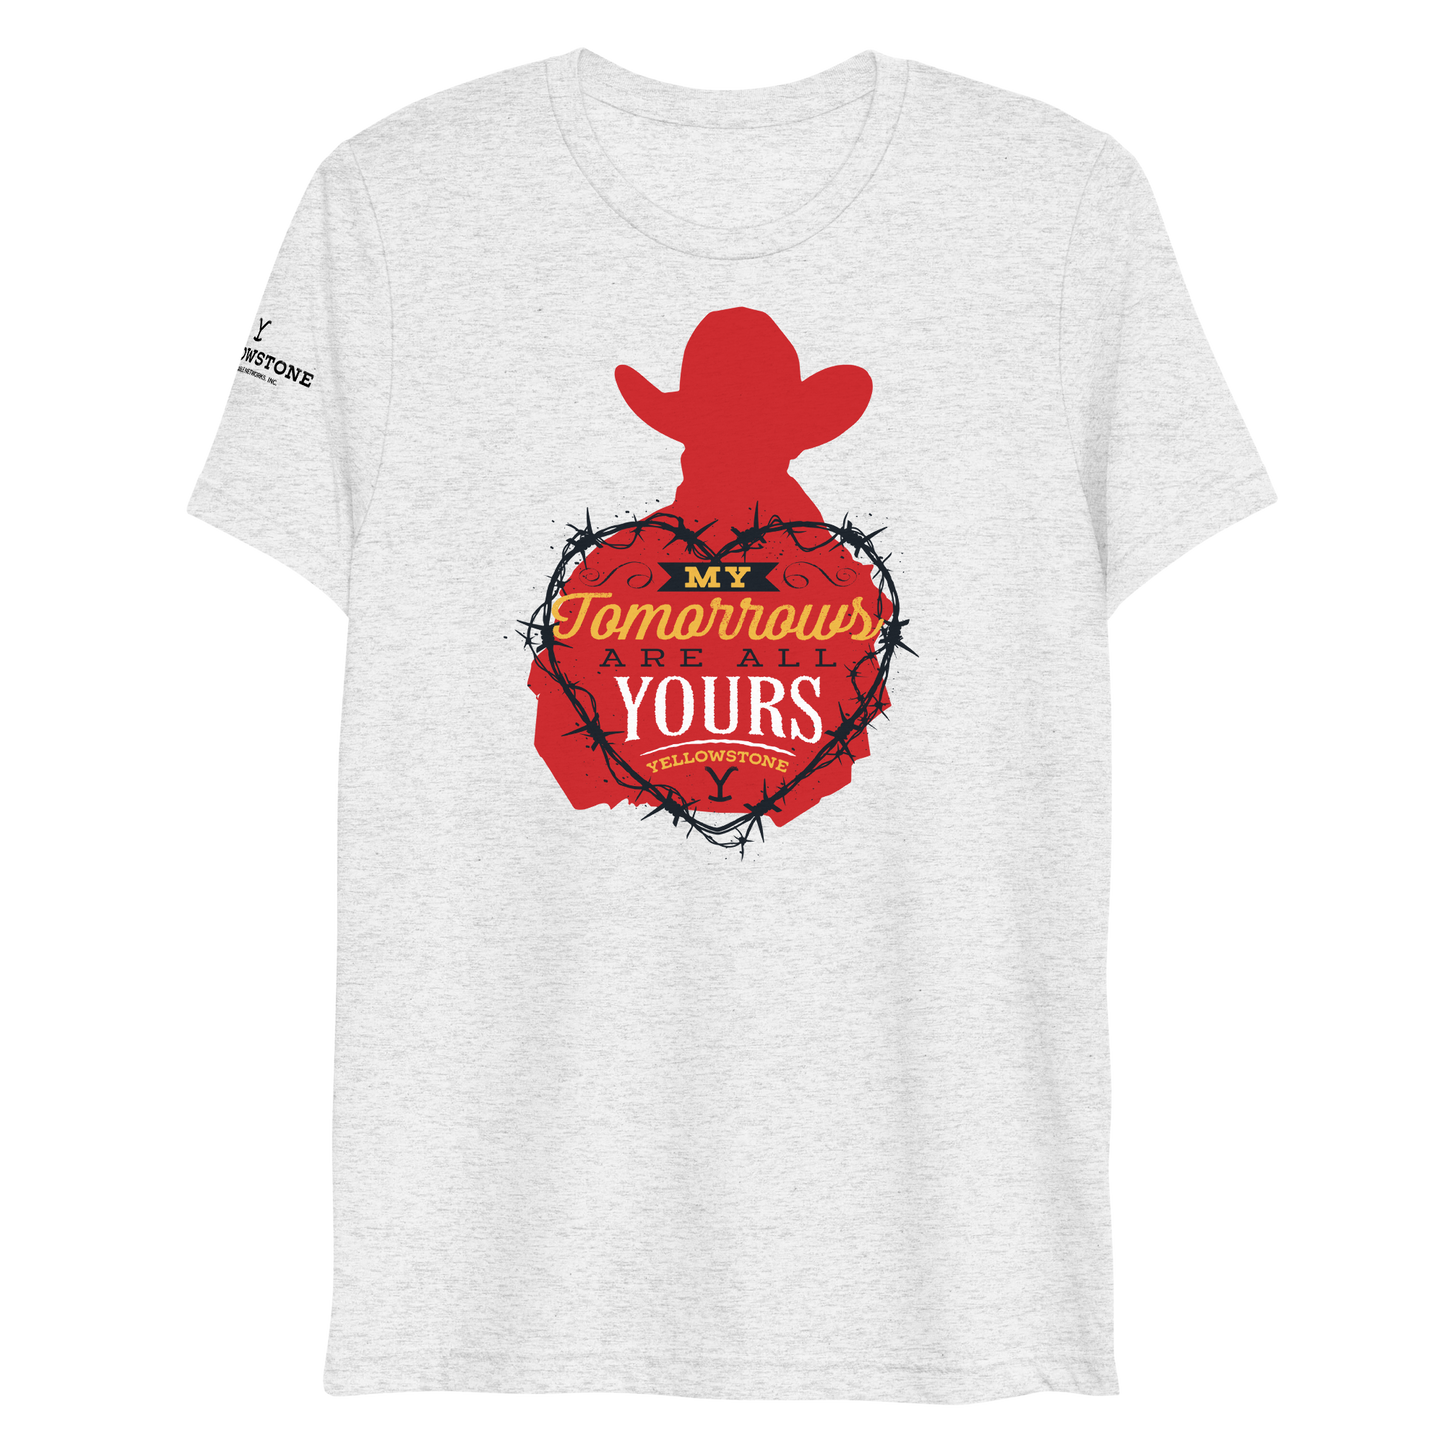 Yellowstone My Tomorrows Are All Yours Cowboy Unisex Tri-Blend T-Shirt